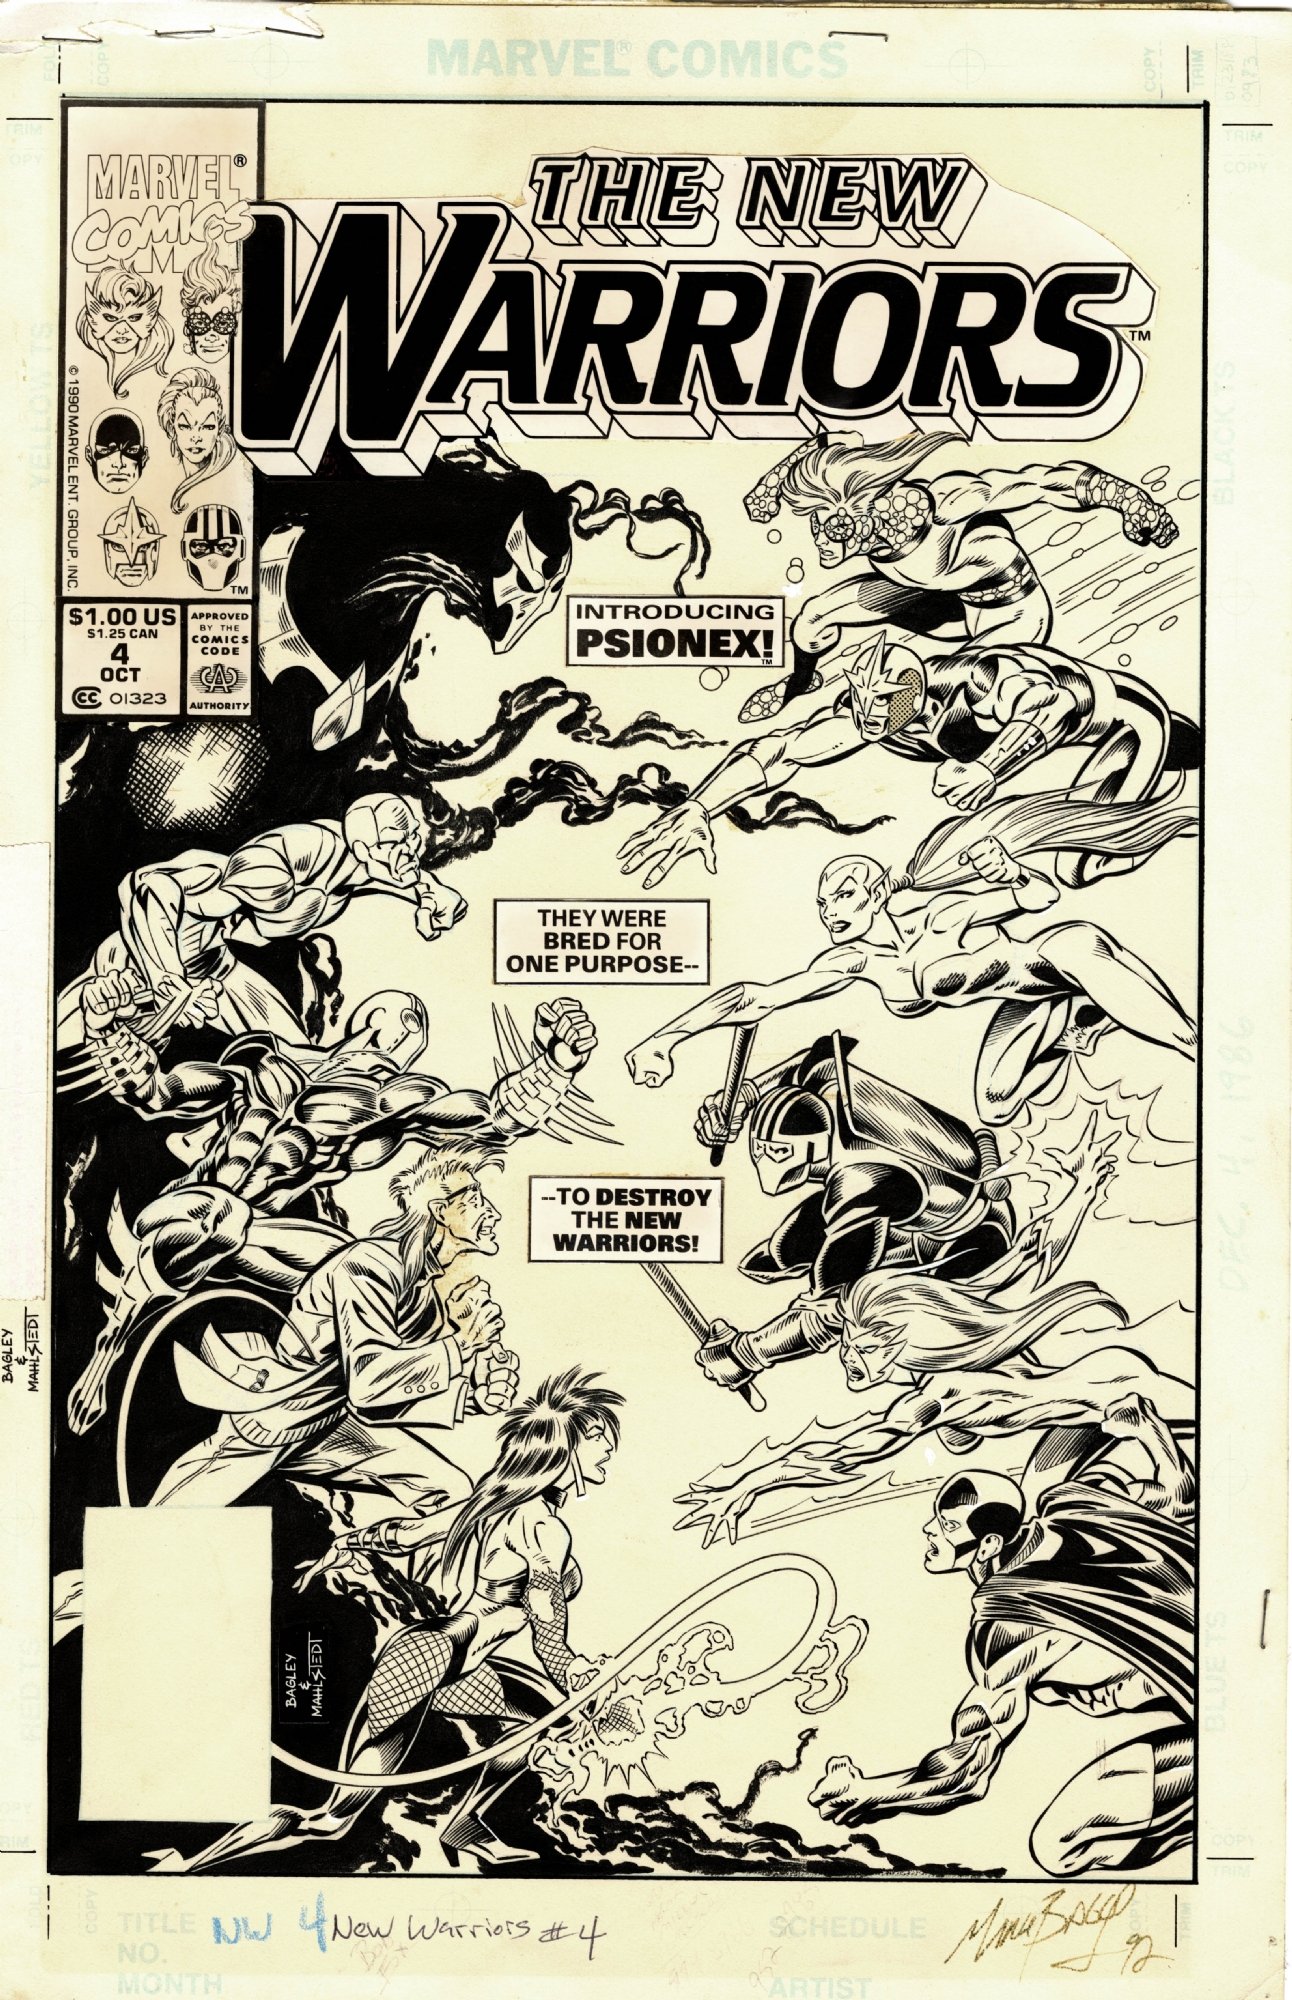 Introducing the New 'New Warriors